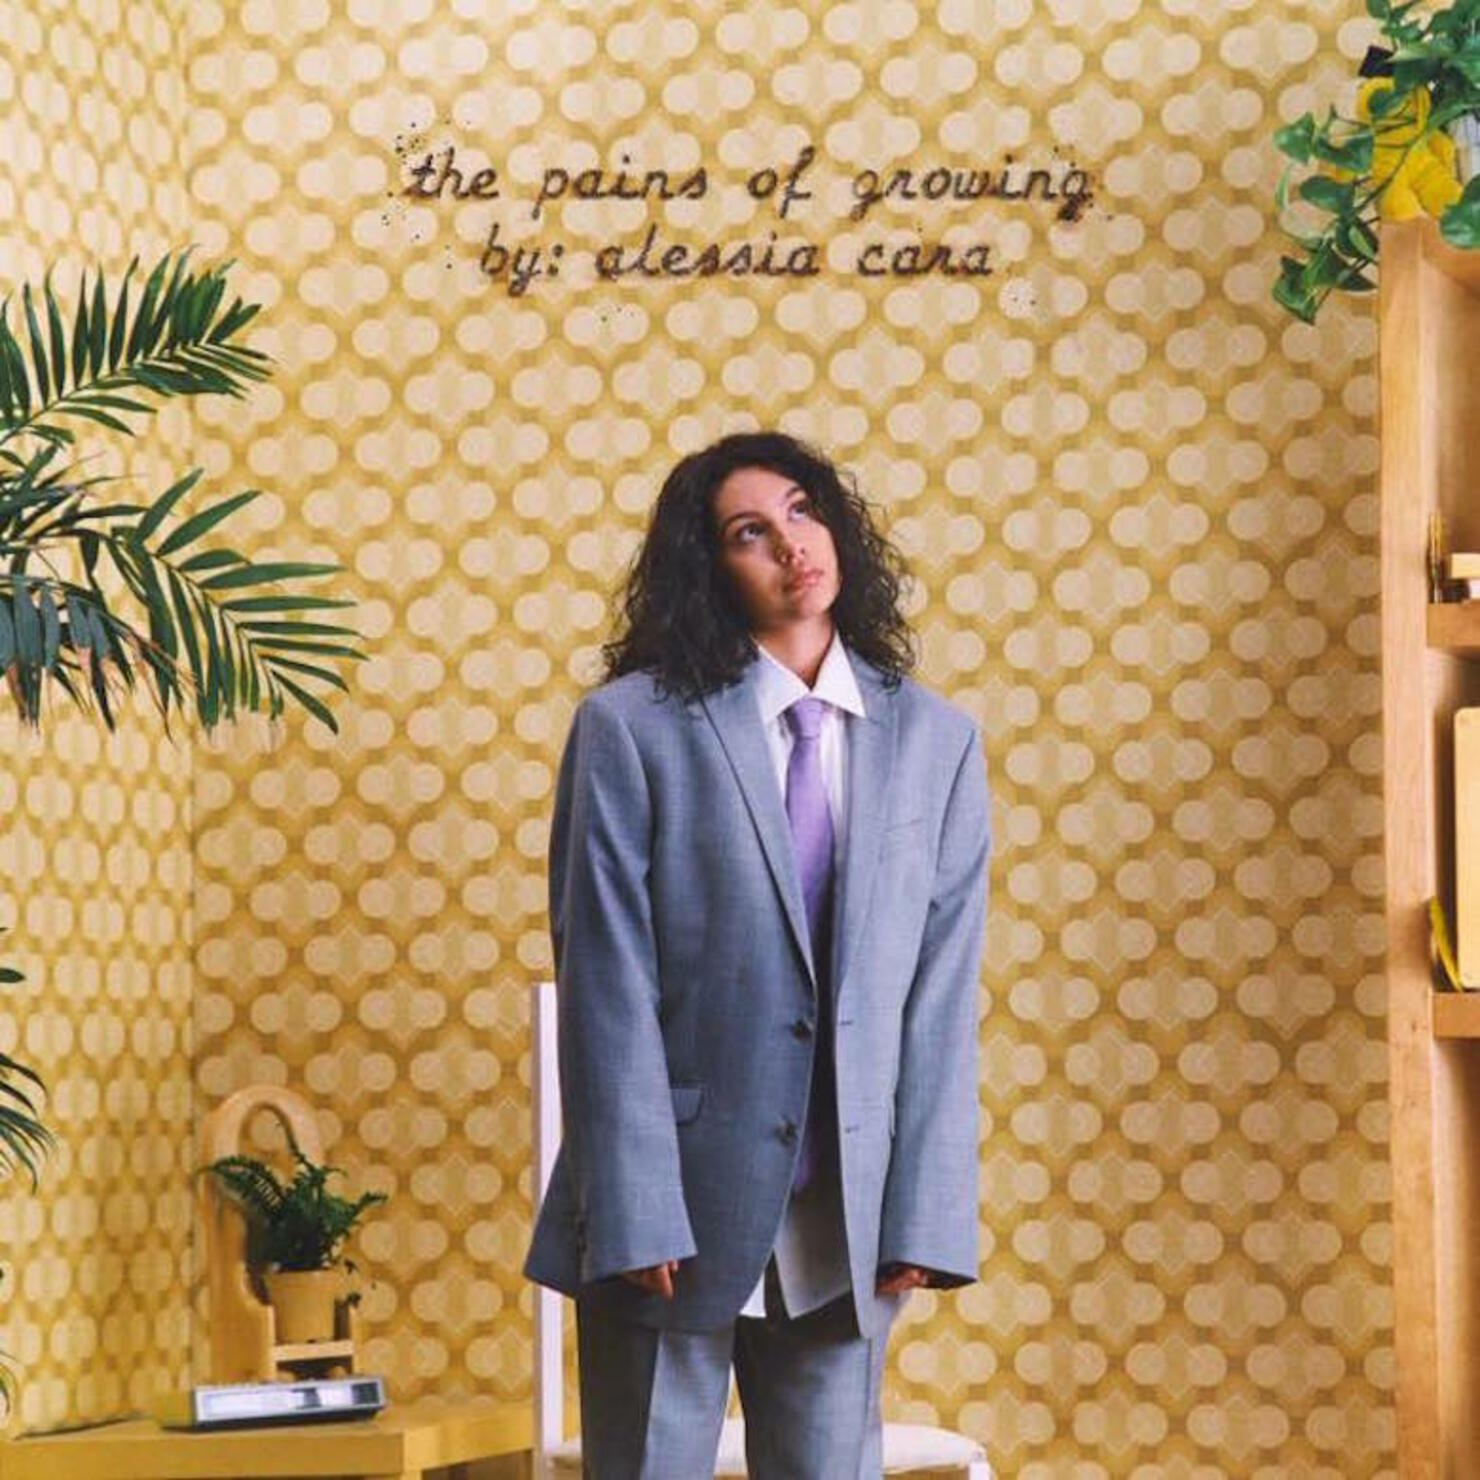 Alessia Cara - 'The Pains of Growing' Album Cover Art